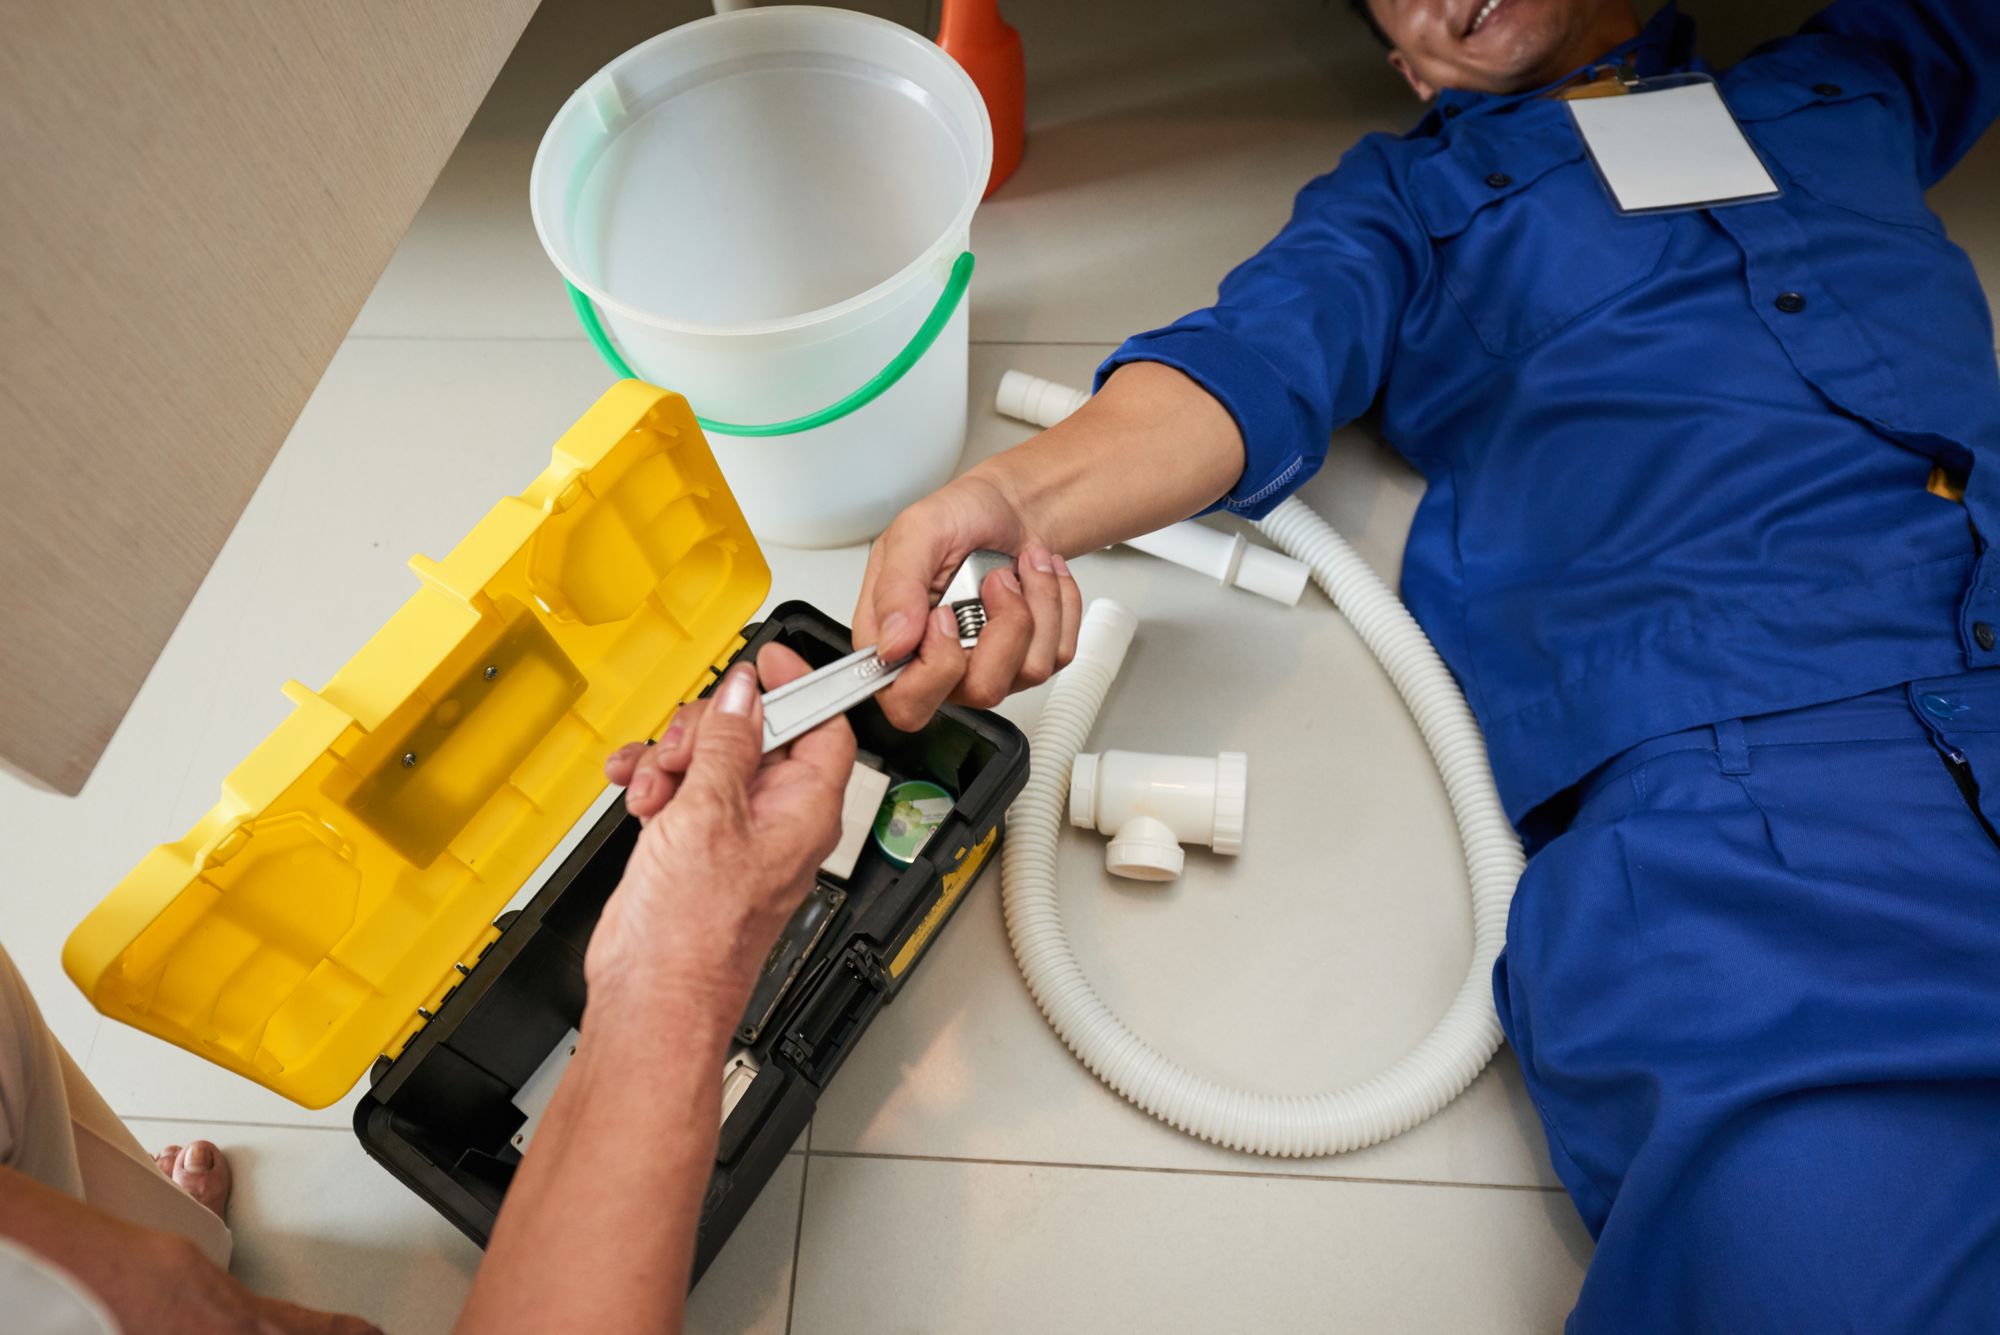 Starting your plumbing business in Texas requires careful planning and a solid foundation